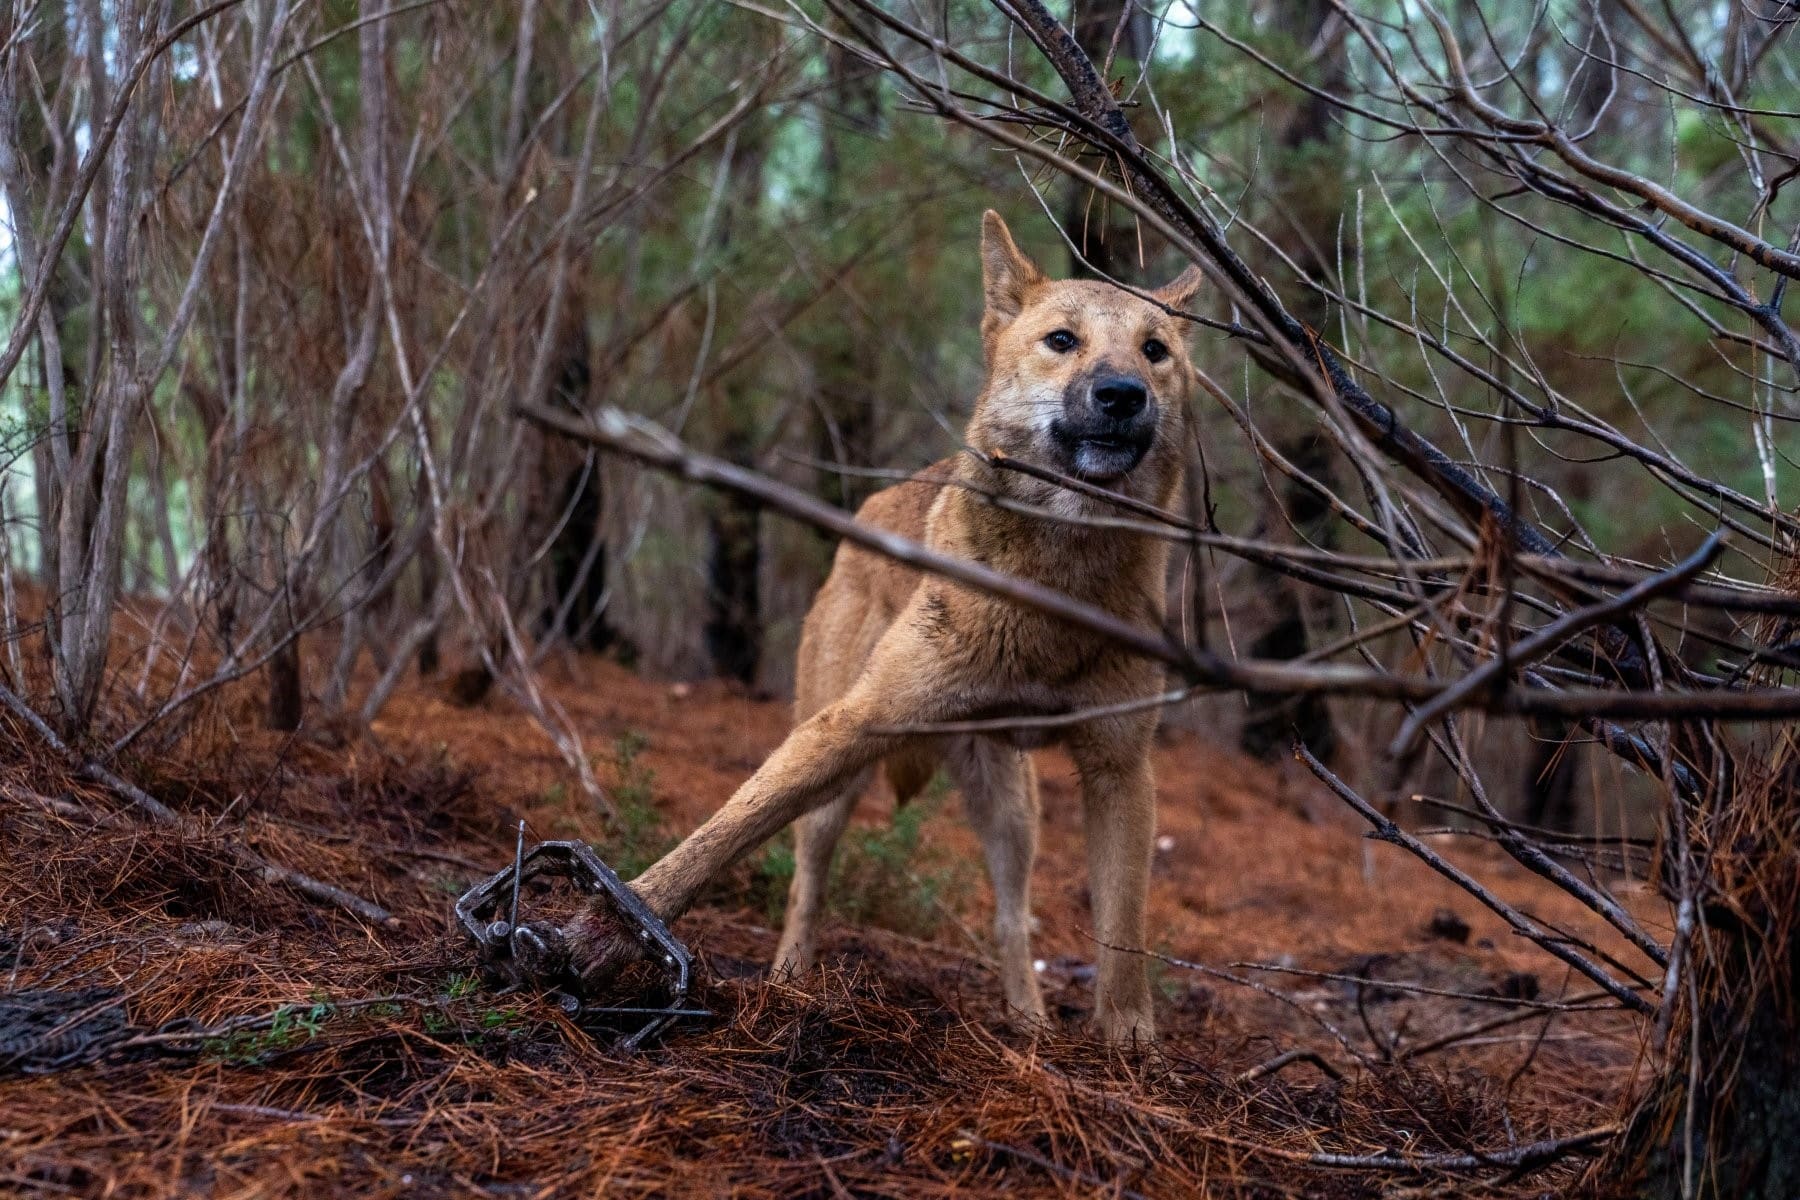 Disappointing: VIC Government renews Order to kill threatened dingoes